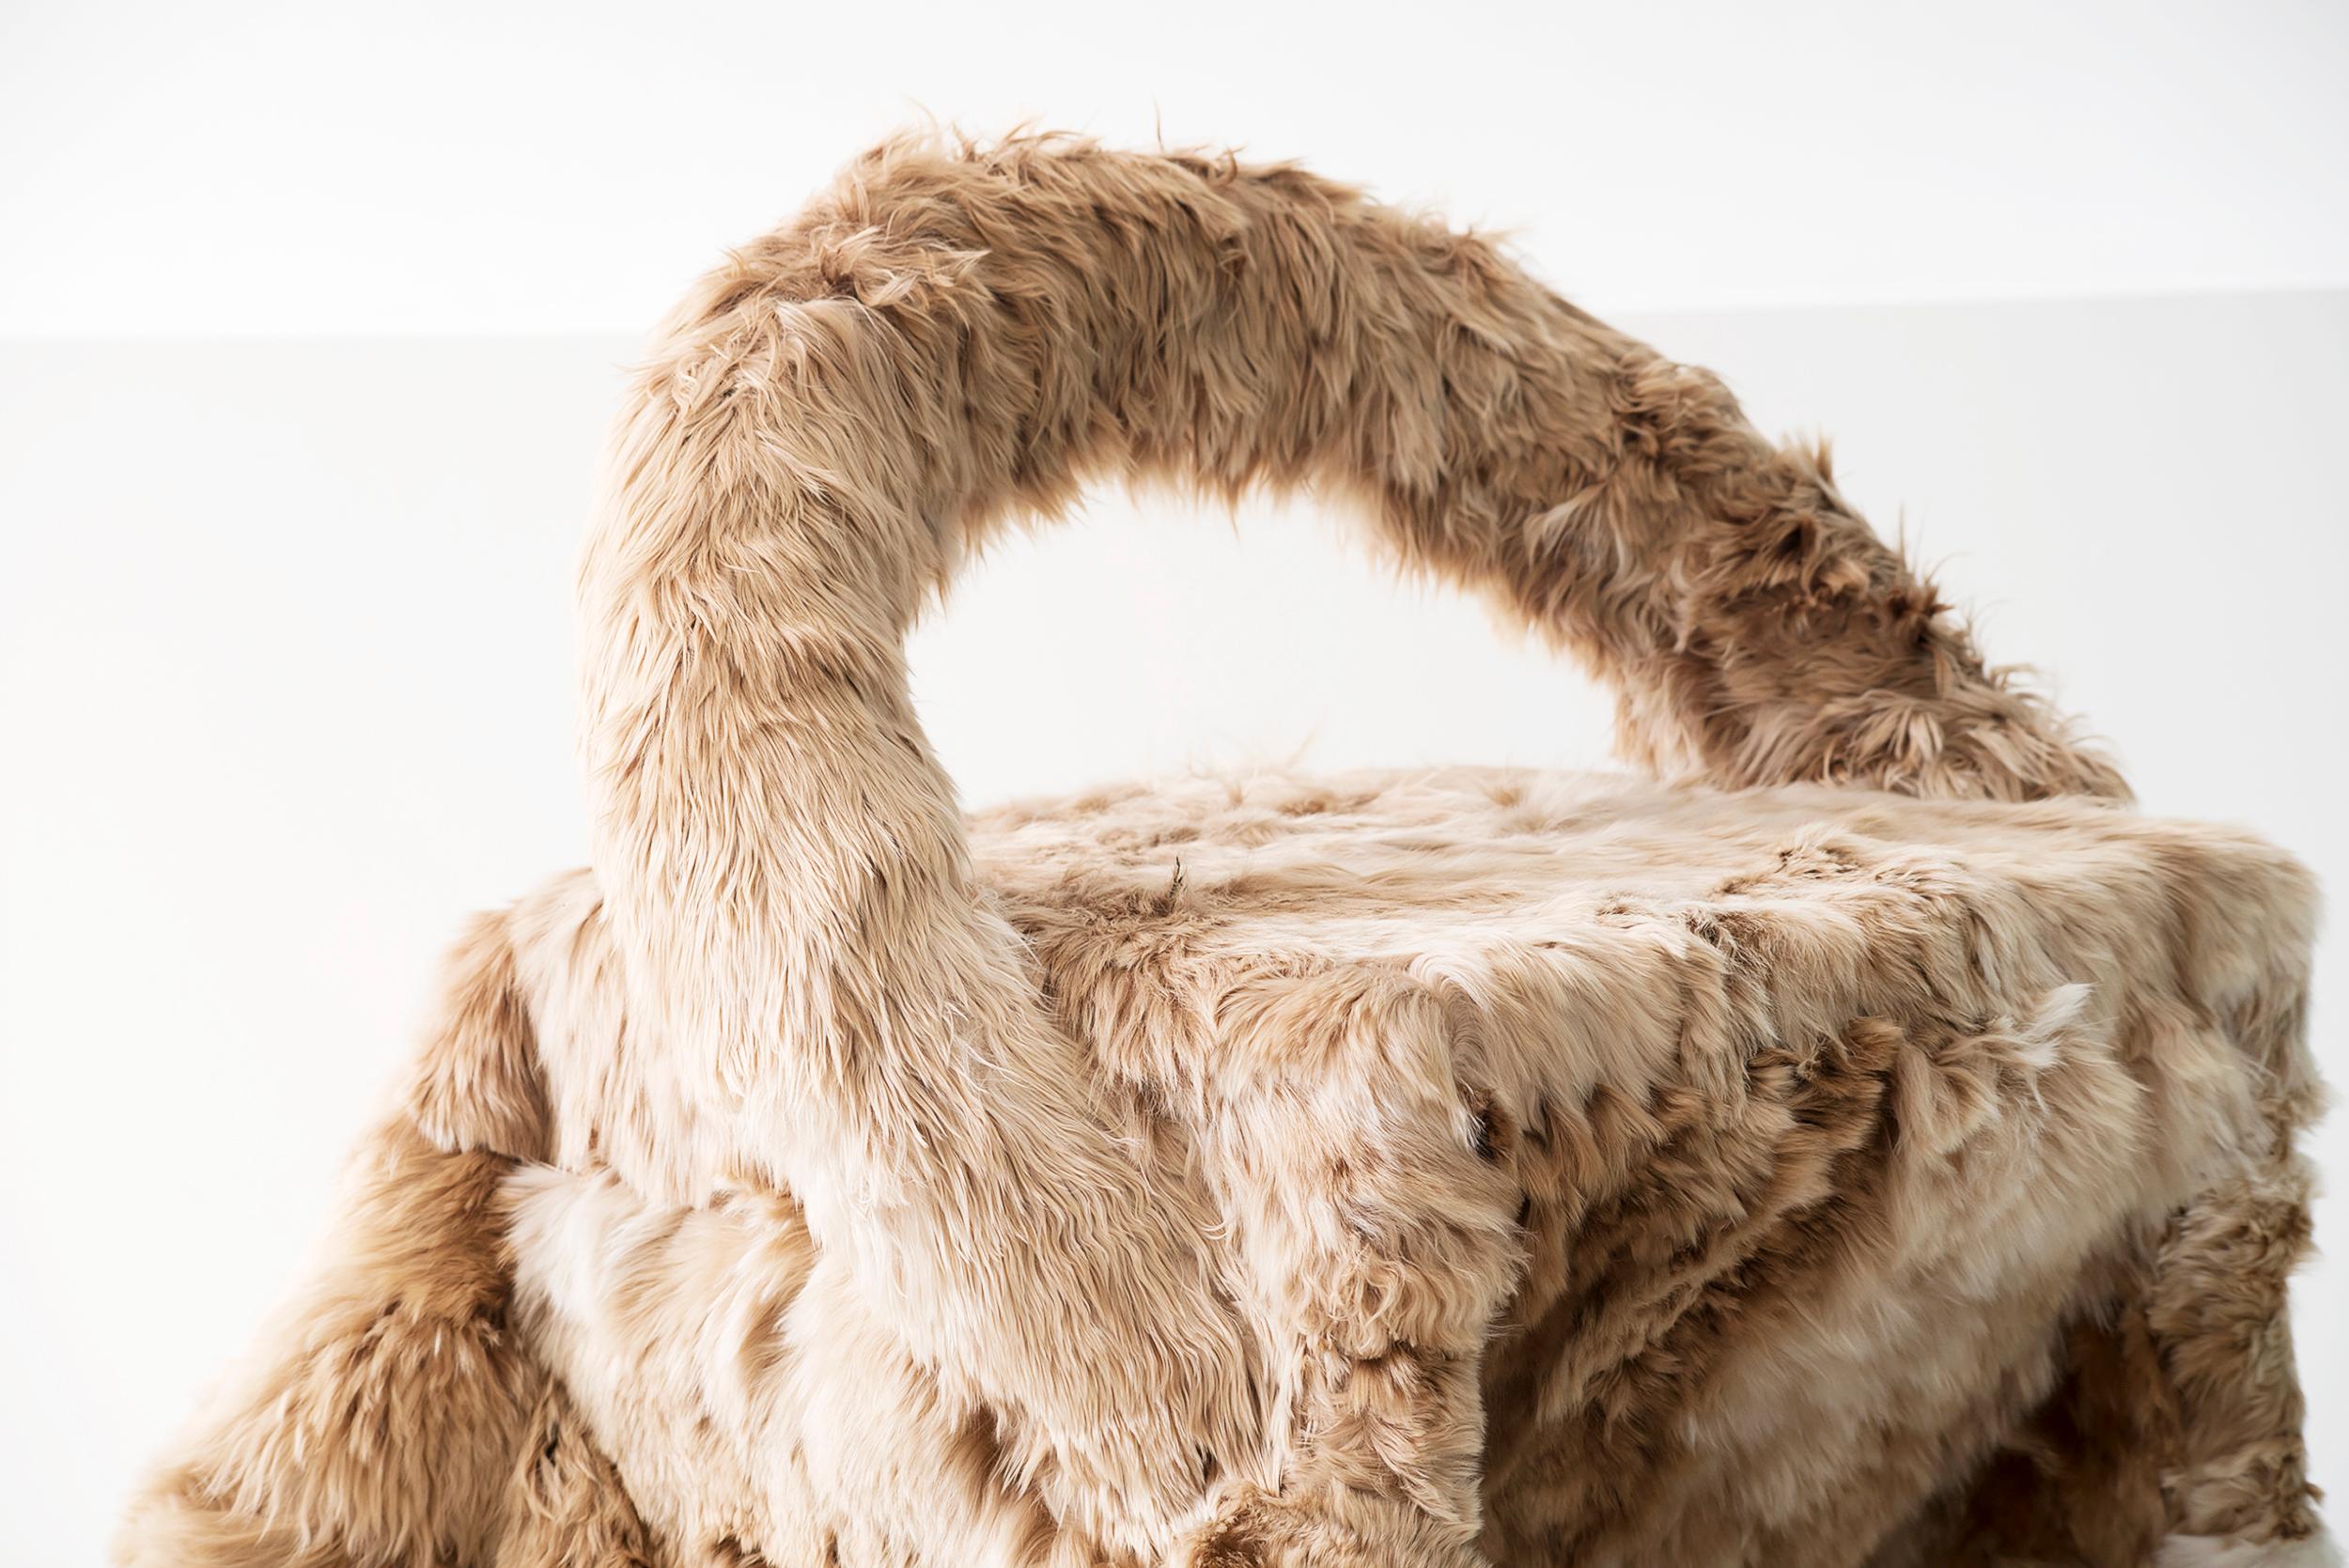 Spanish Alpaca Fur Chair or Dining Chair by Guillermo Santomà, Spain 2018 Fur upholstery